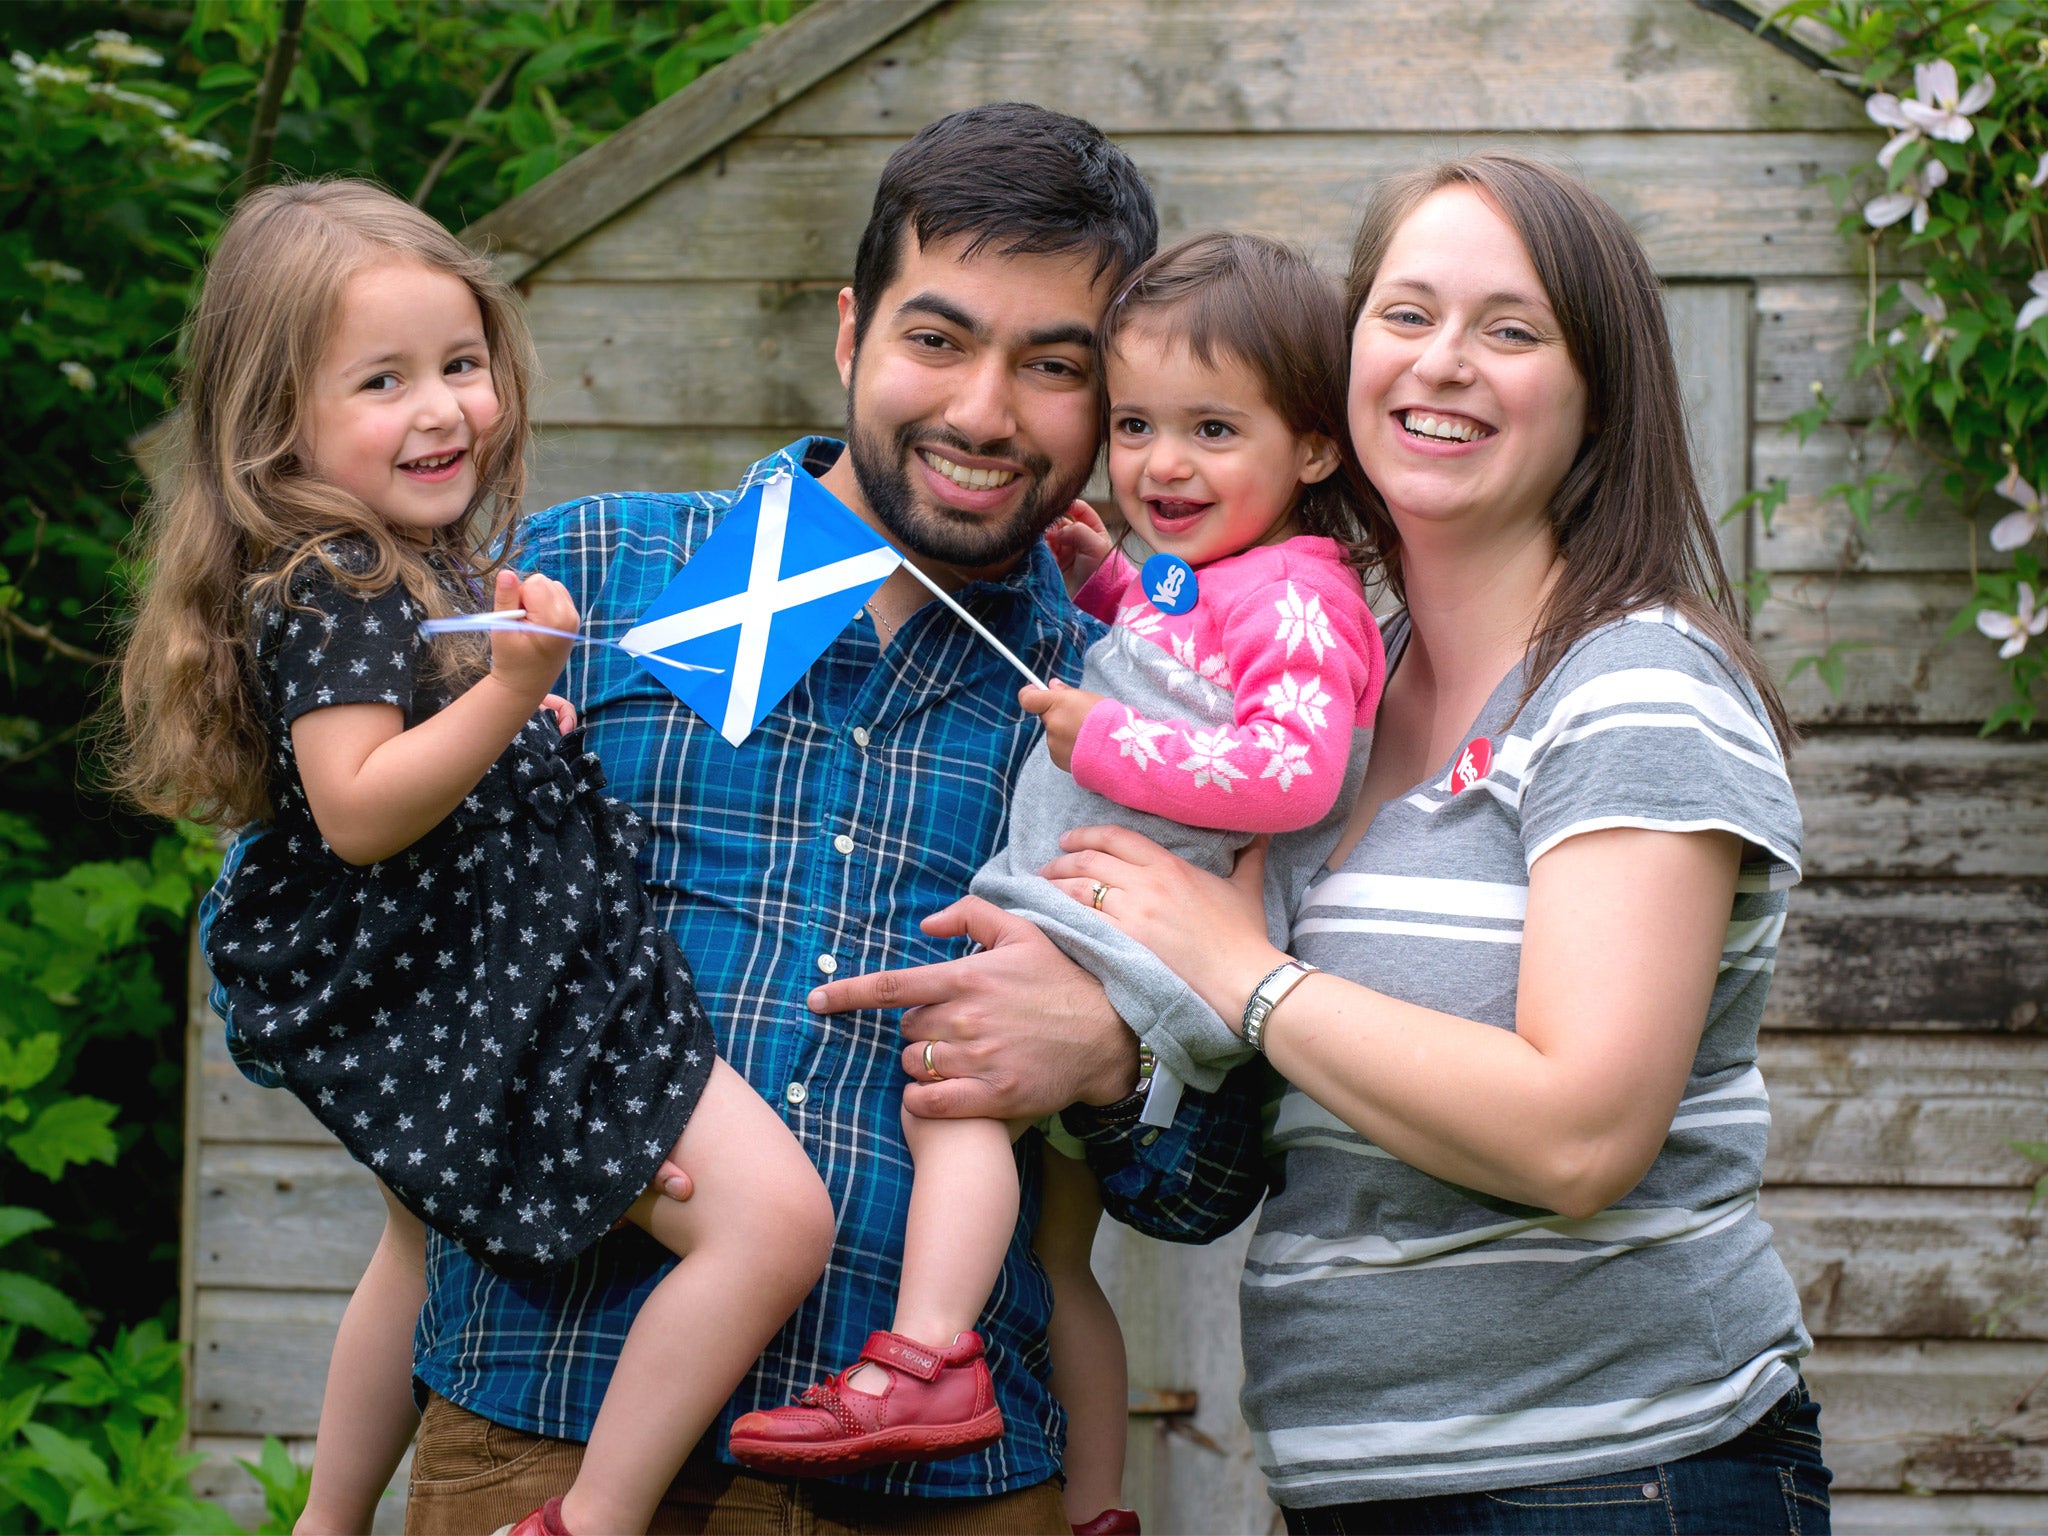 Fiona Sarwar, with her husband Mohsin and children Hannah and Abigail, at their home in Coupar Angus, Perthshire